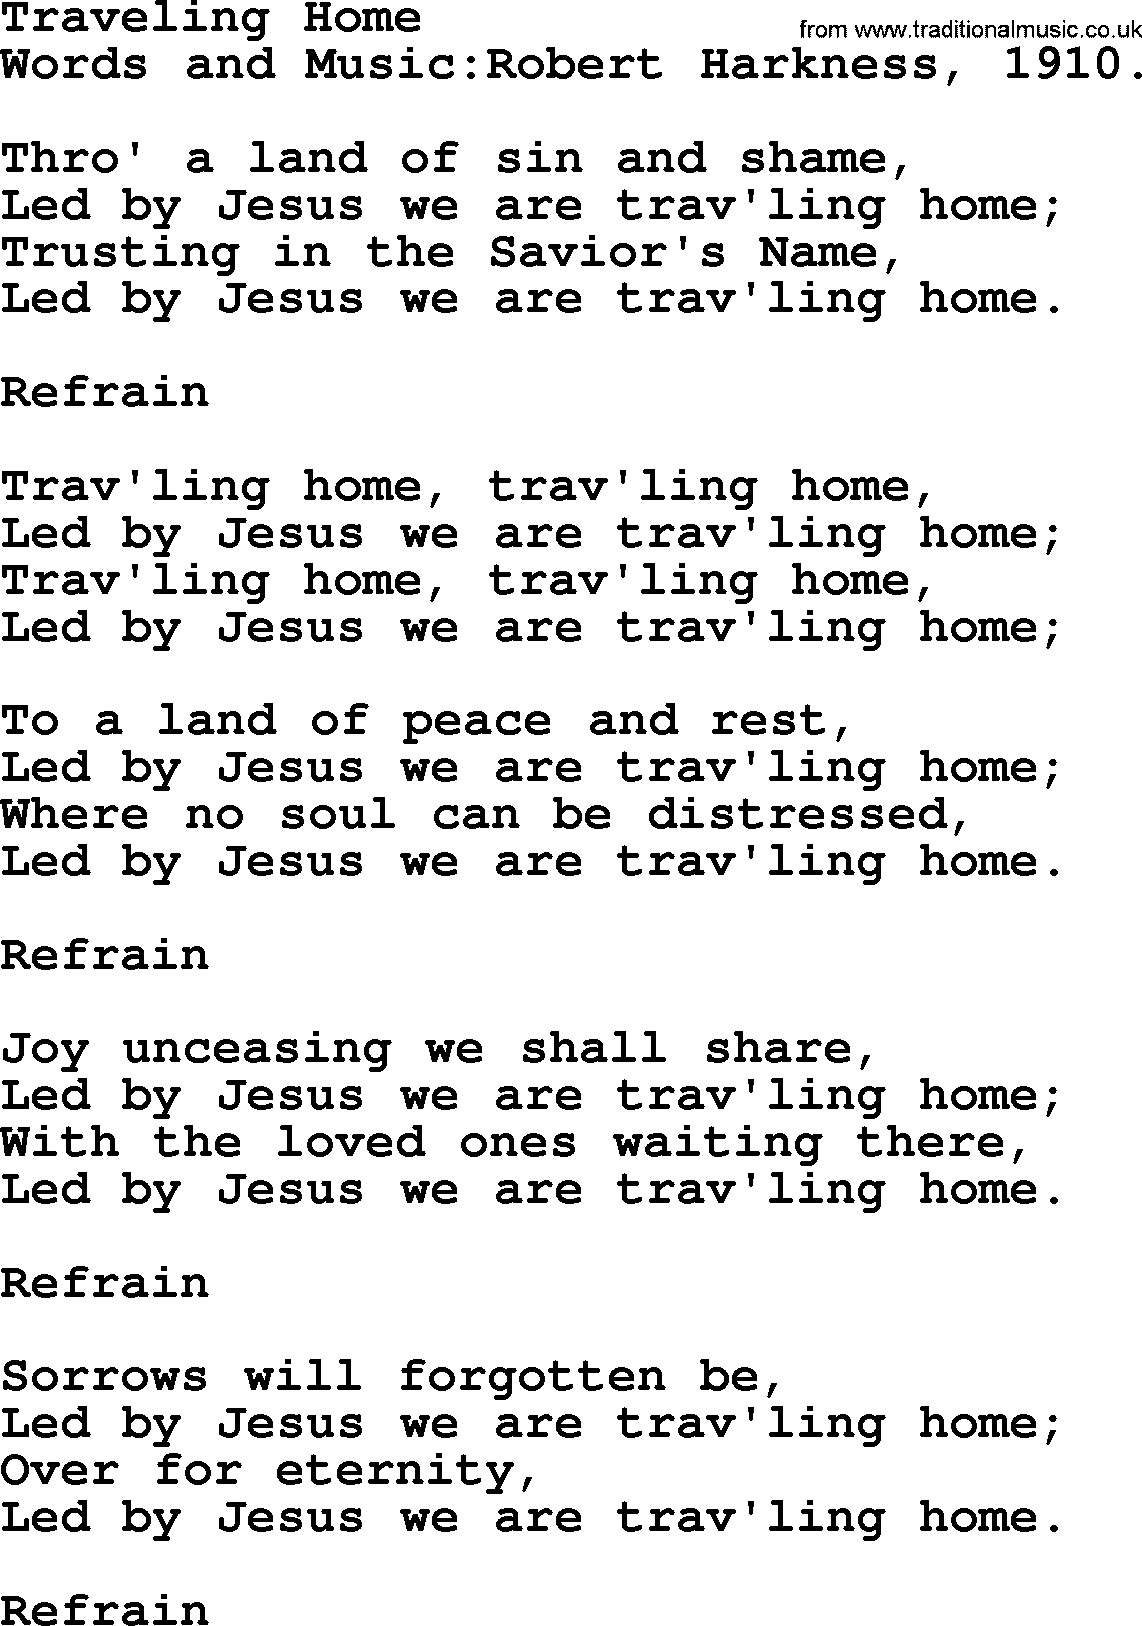 Songs and Hymns about Heaven: Traveling Home lyrics with PDF